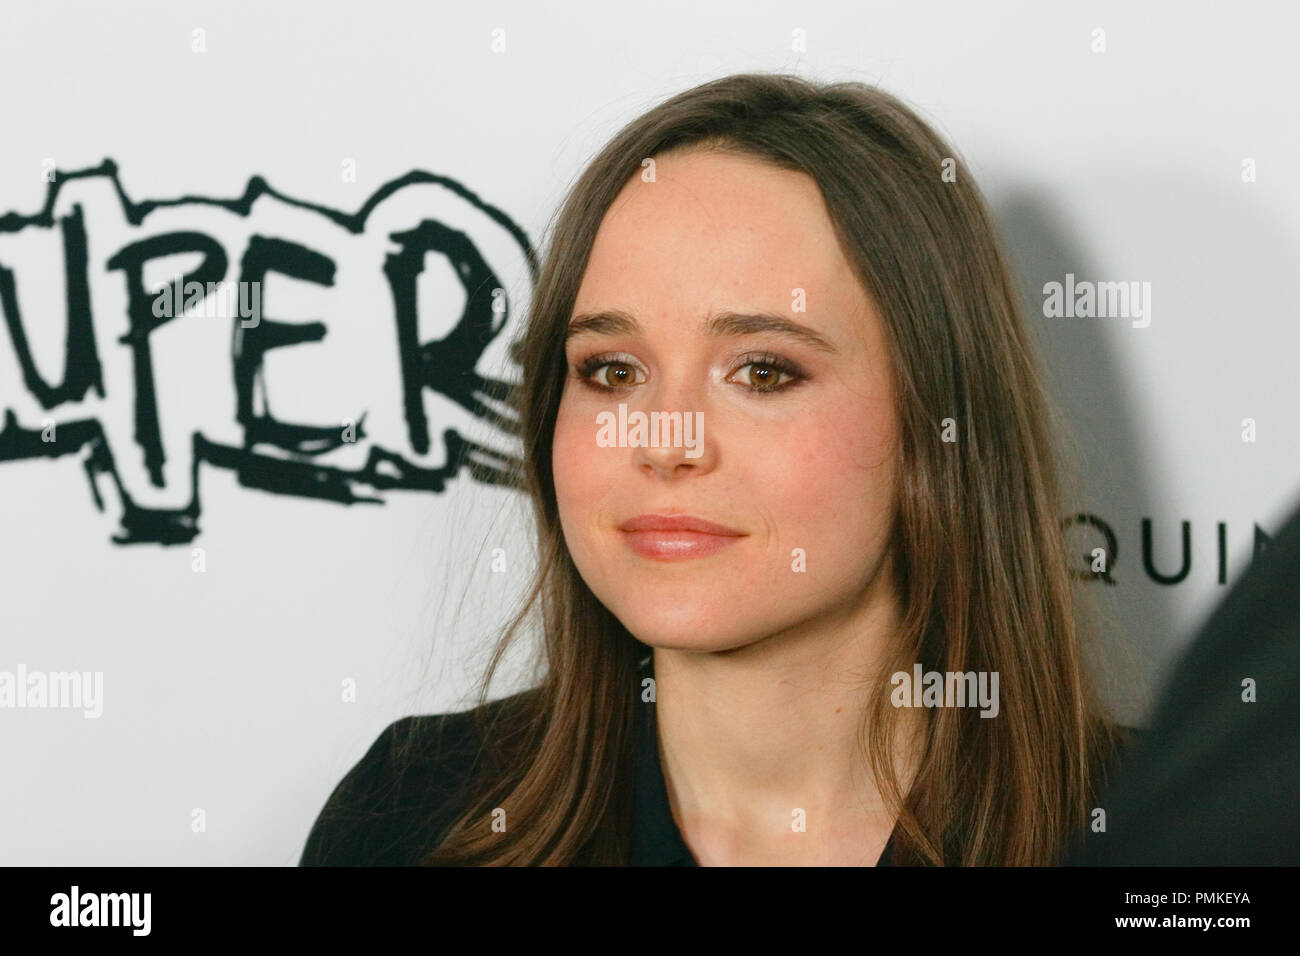 Ellen Page at the Premiere of IFC Midnight's 'Super'. Arrivals held at The Egyptian Theater in Hollywood, CA, March 21, 2011.  Photo by Joe Martinez / PictureLux Stock Photo